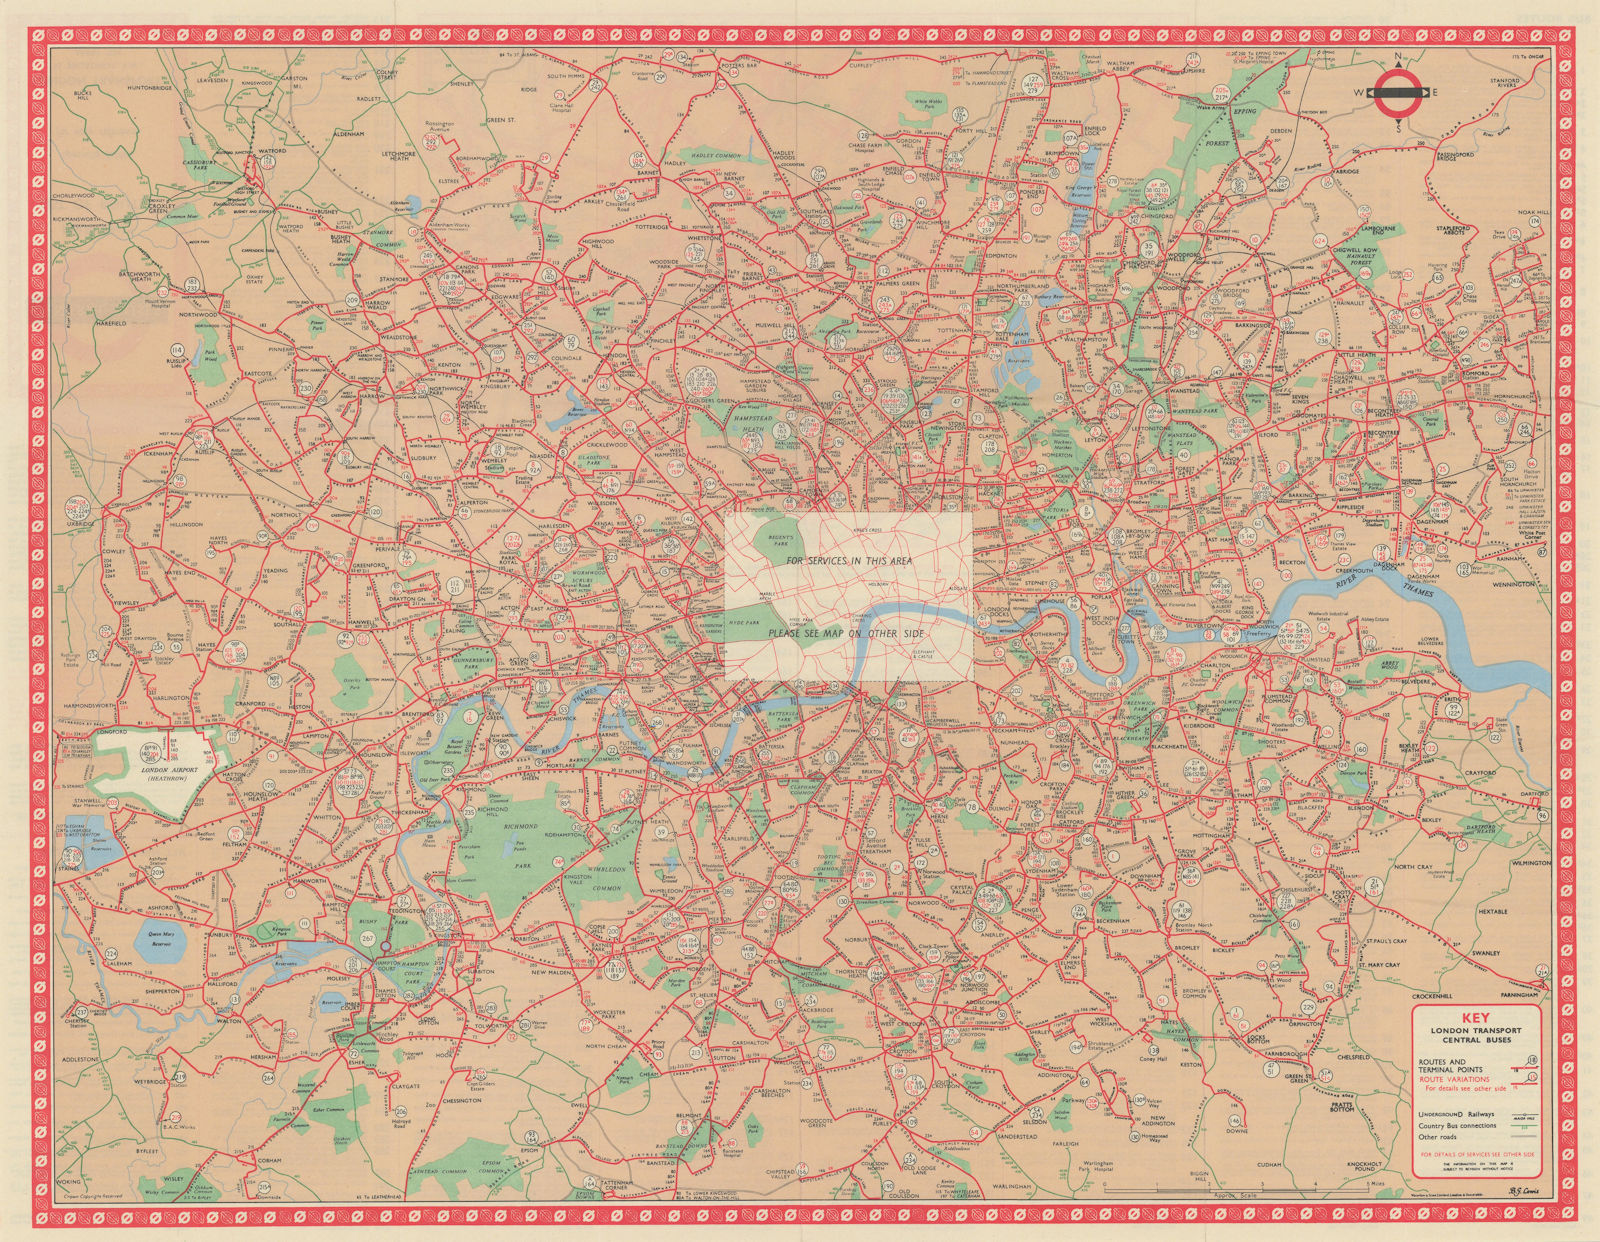 London Transport Central Buses map and list of routes. LEWIS #1 1966 old